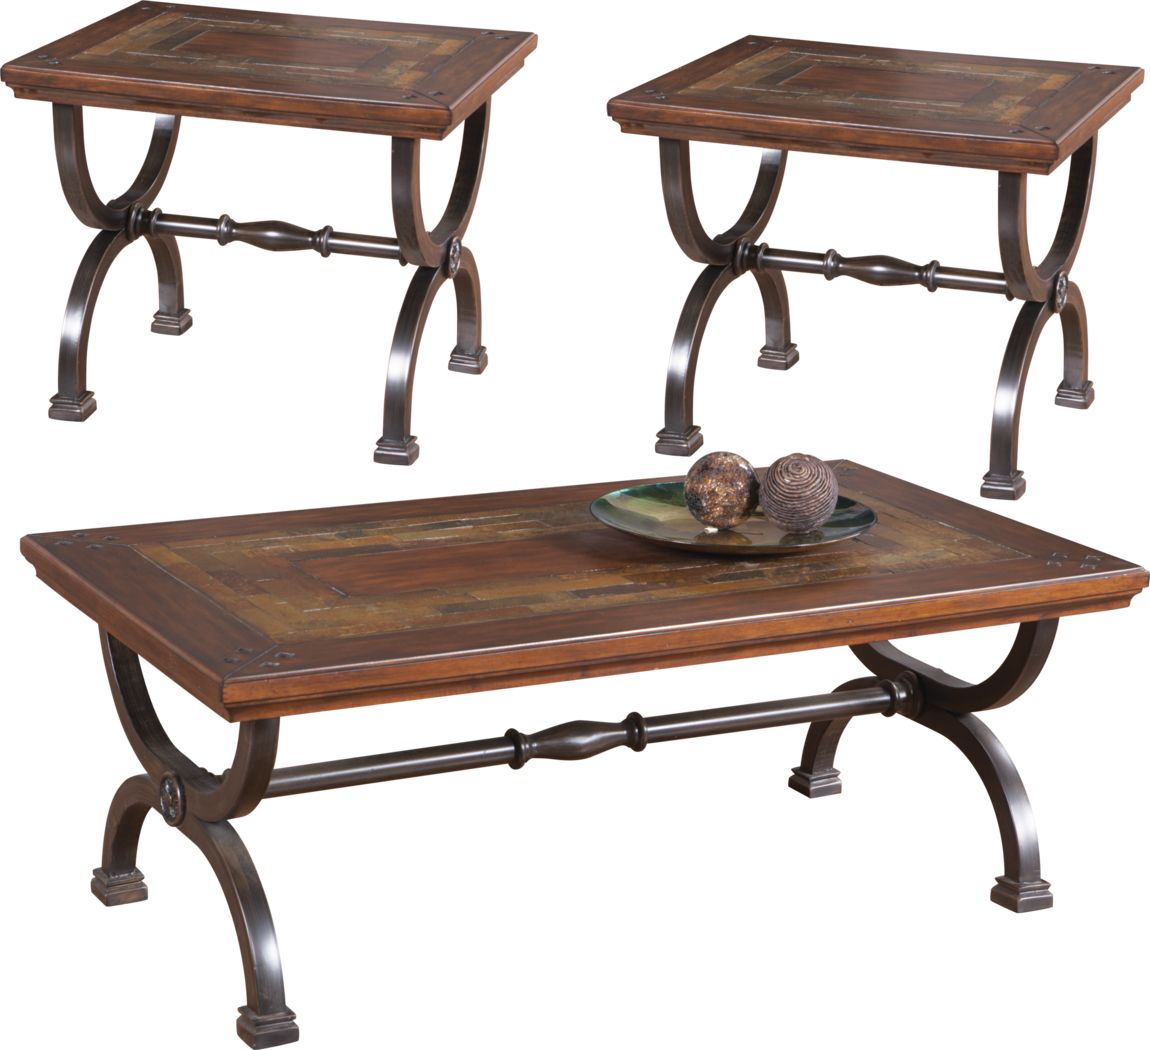 Rustic Style Living Room Tables Sets, Rustic Living Room Tables